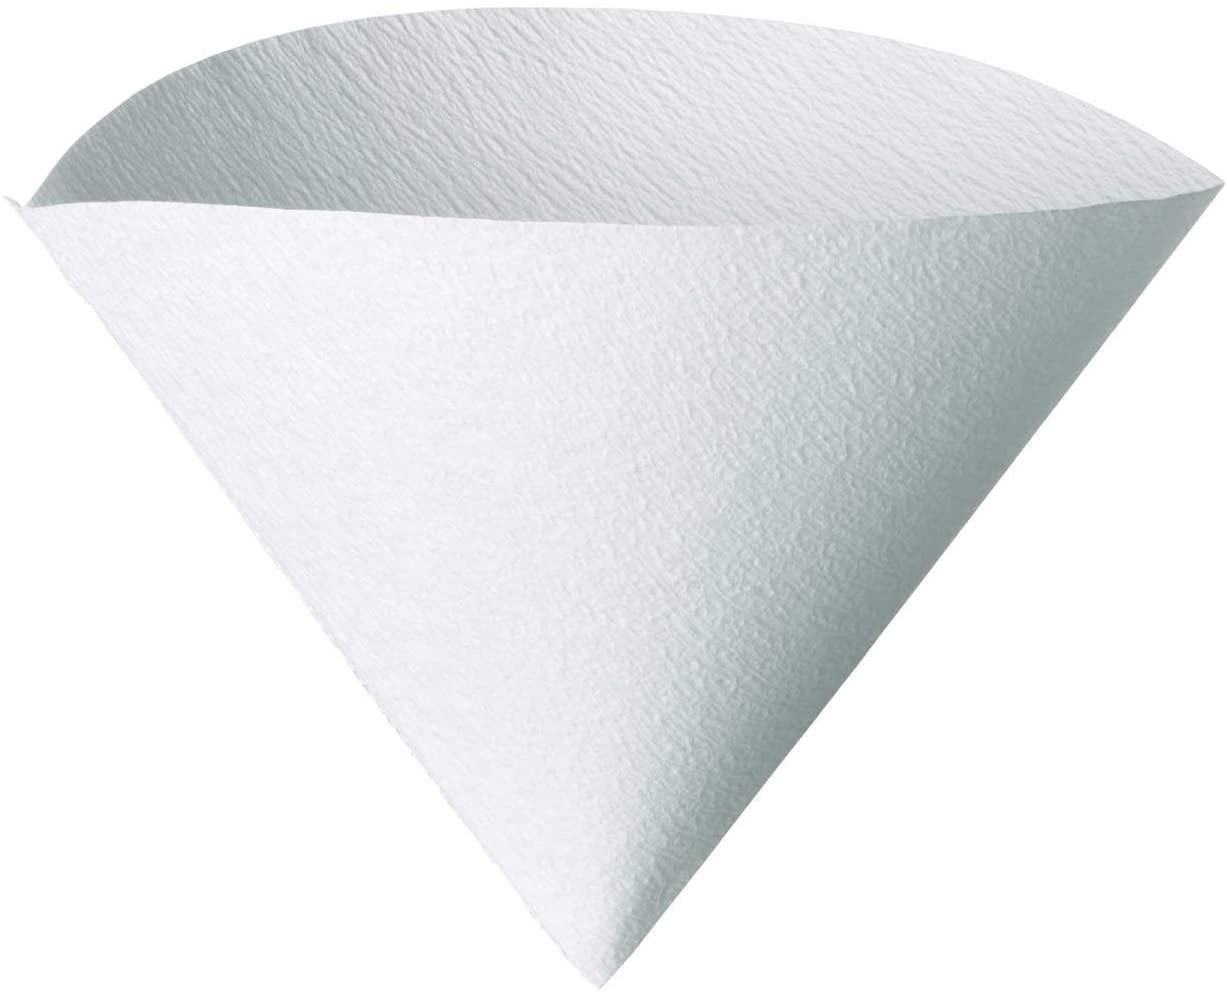 Hario V60 Coffee Filter Papers - White